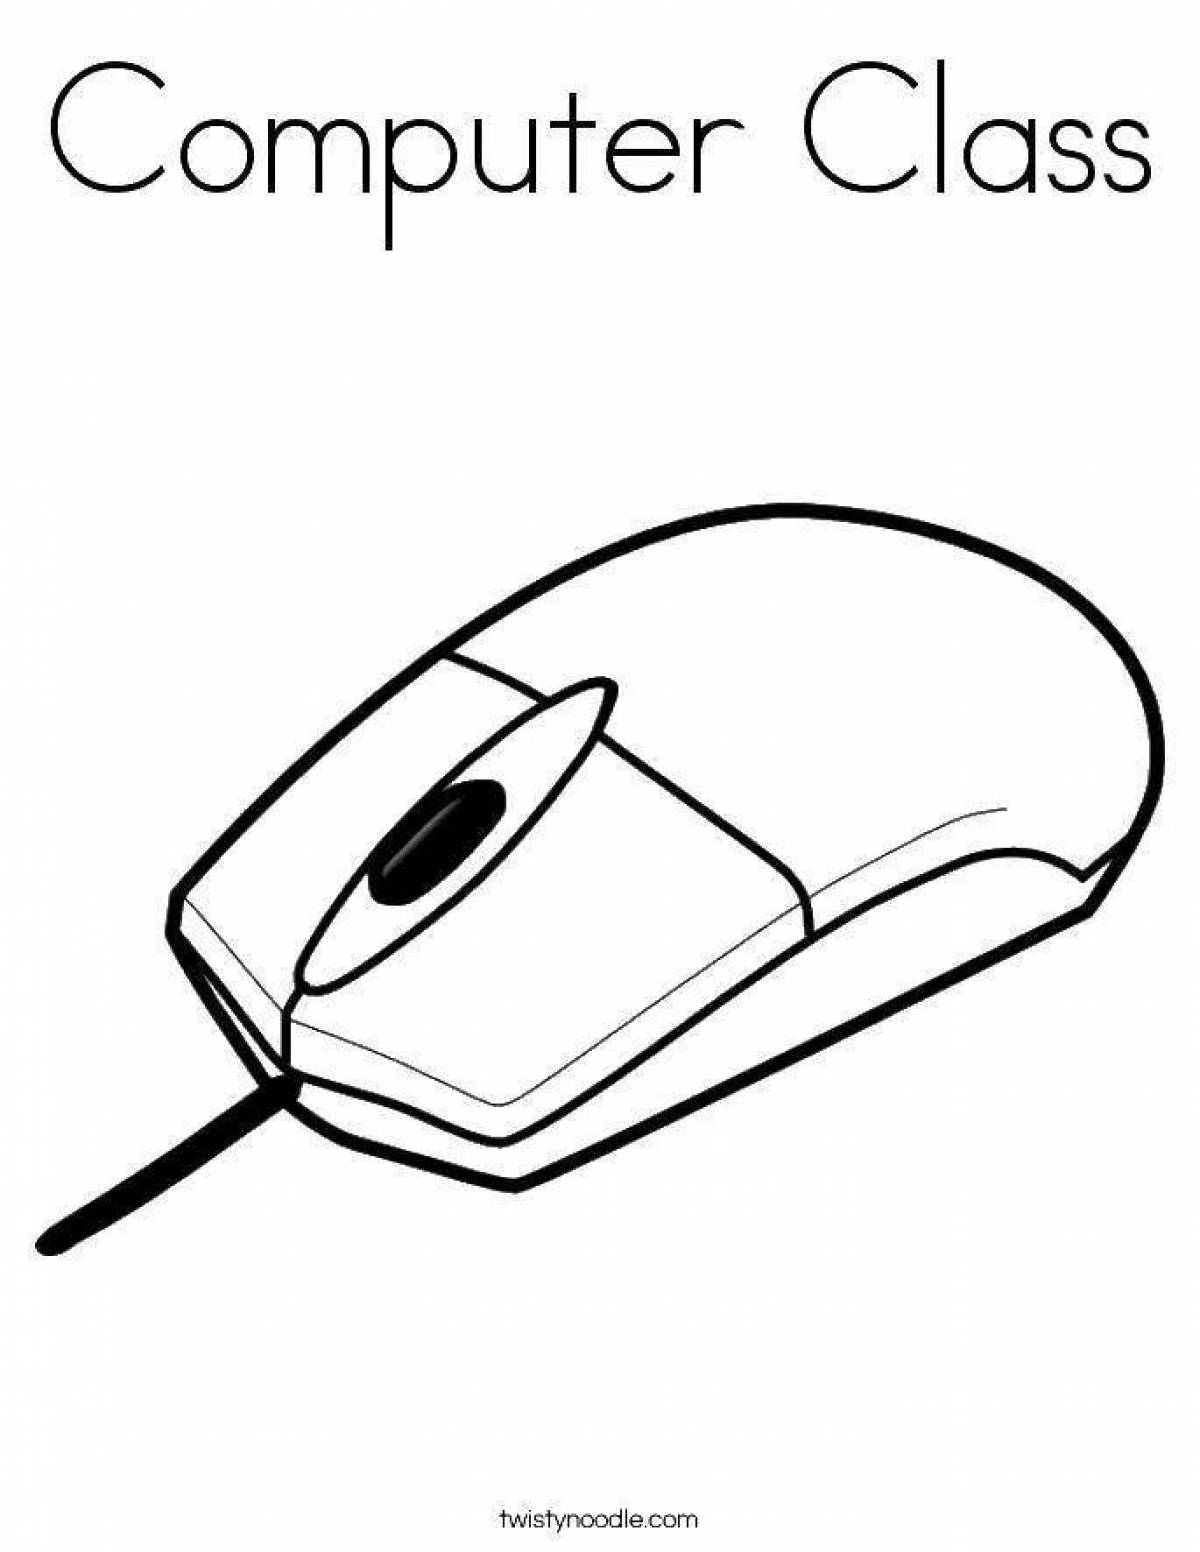 Computer mouse #14